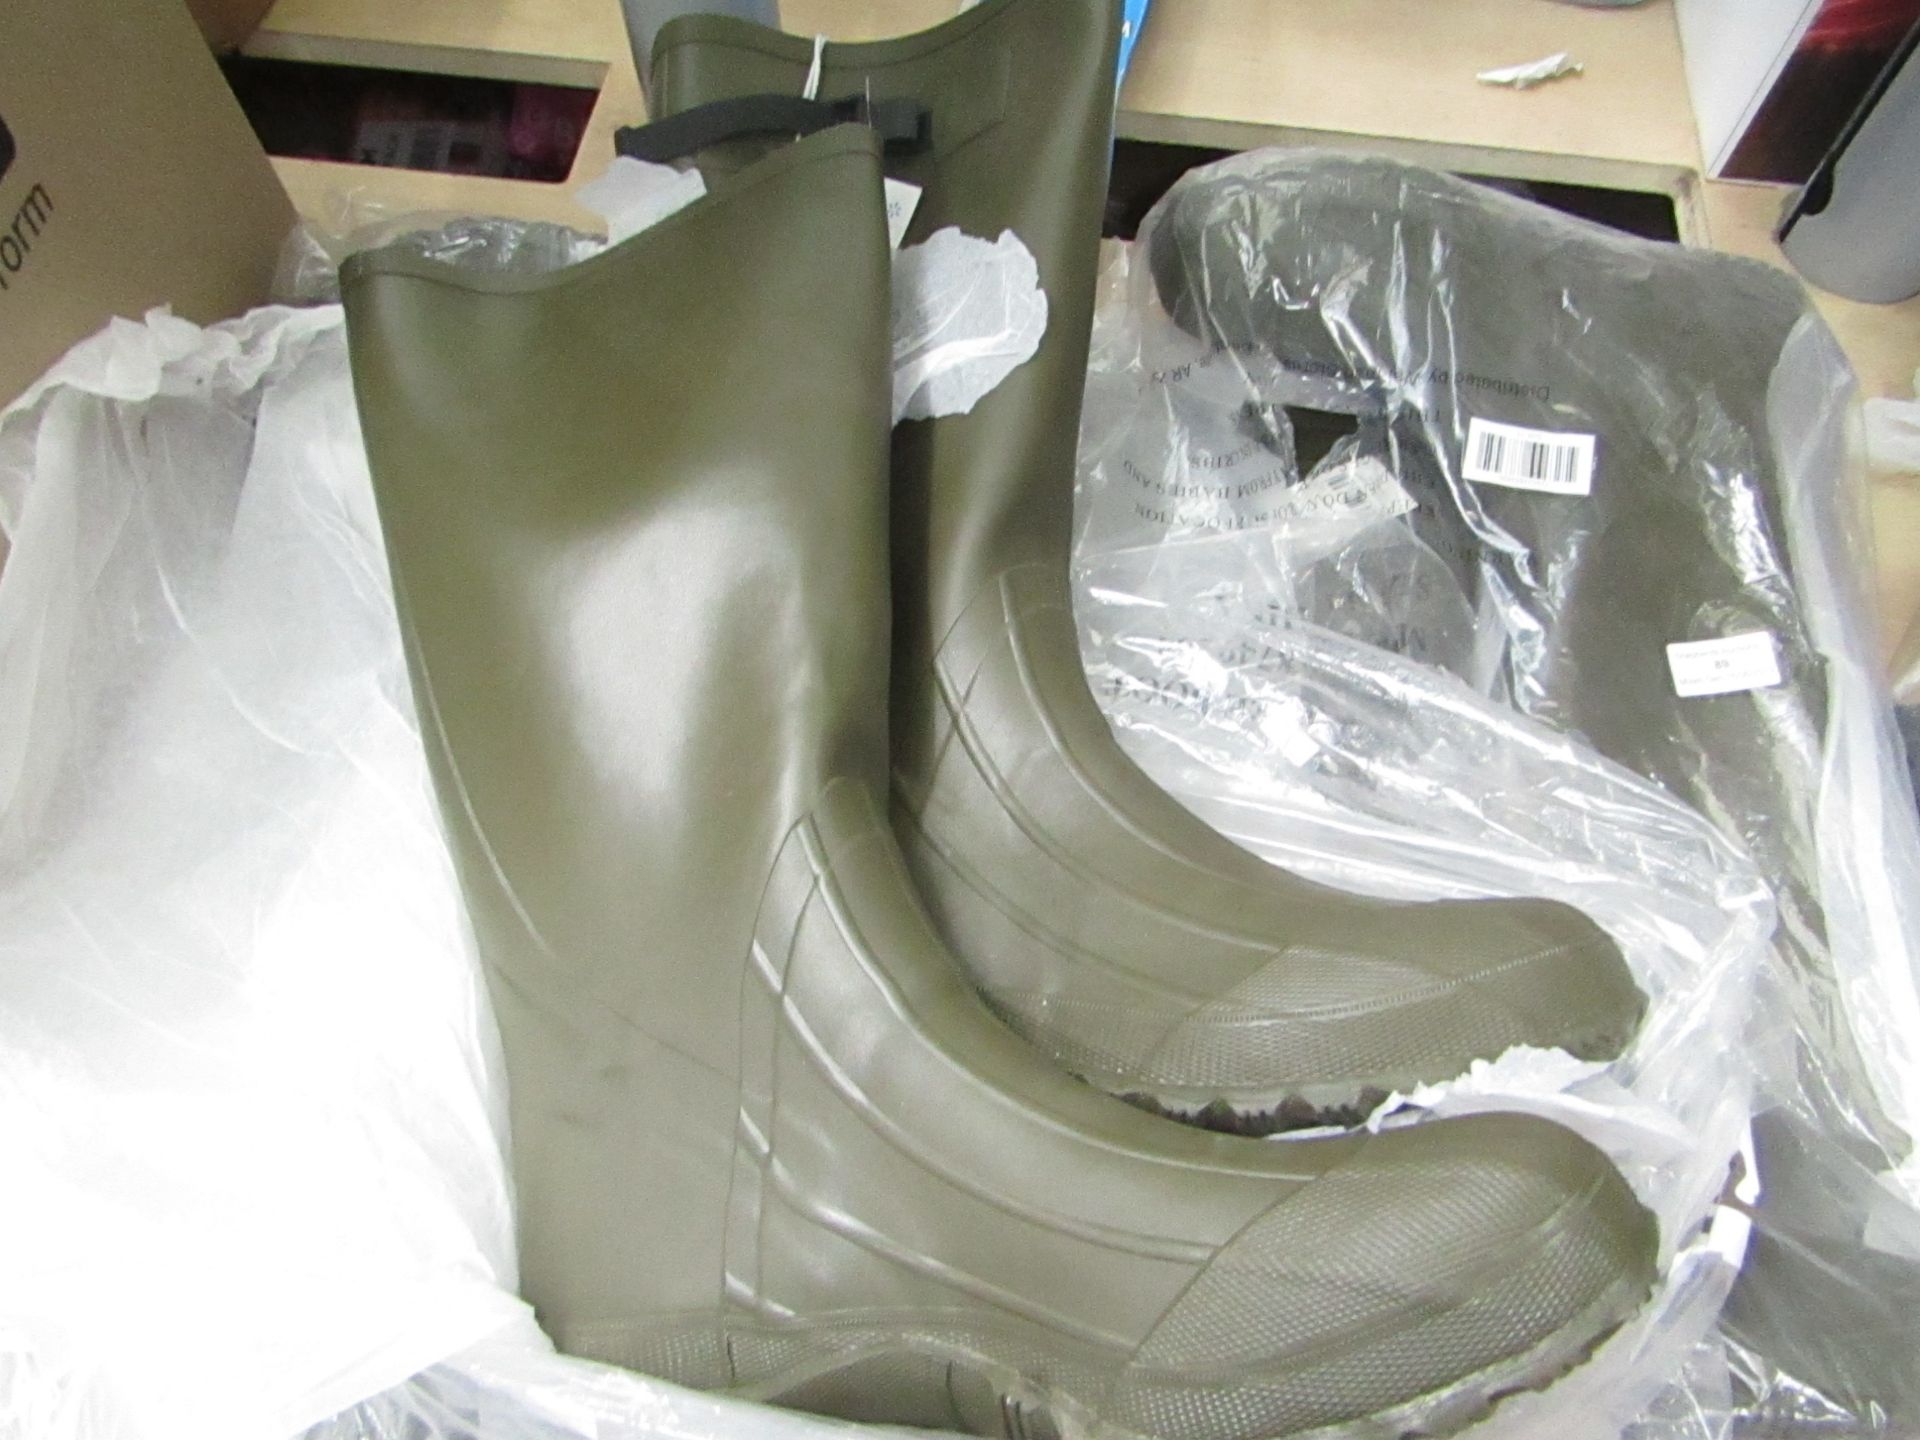 Pair of Walmart Mens Wellies size 11 new with tag